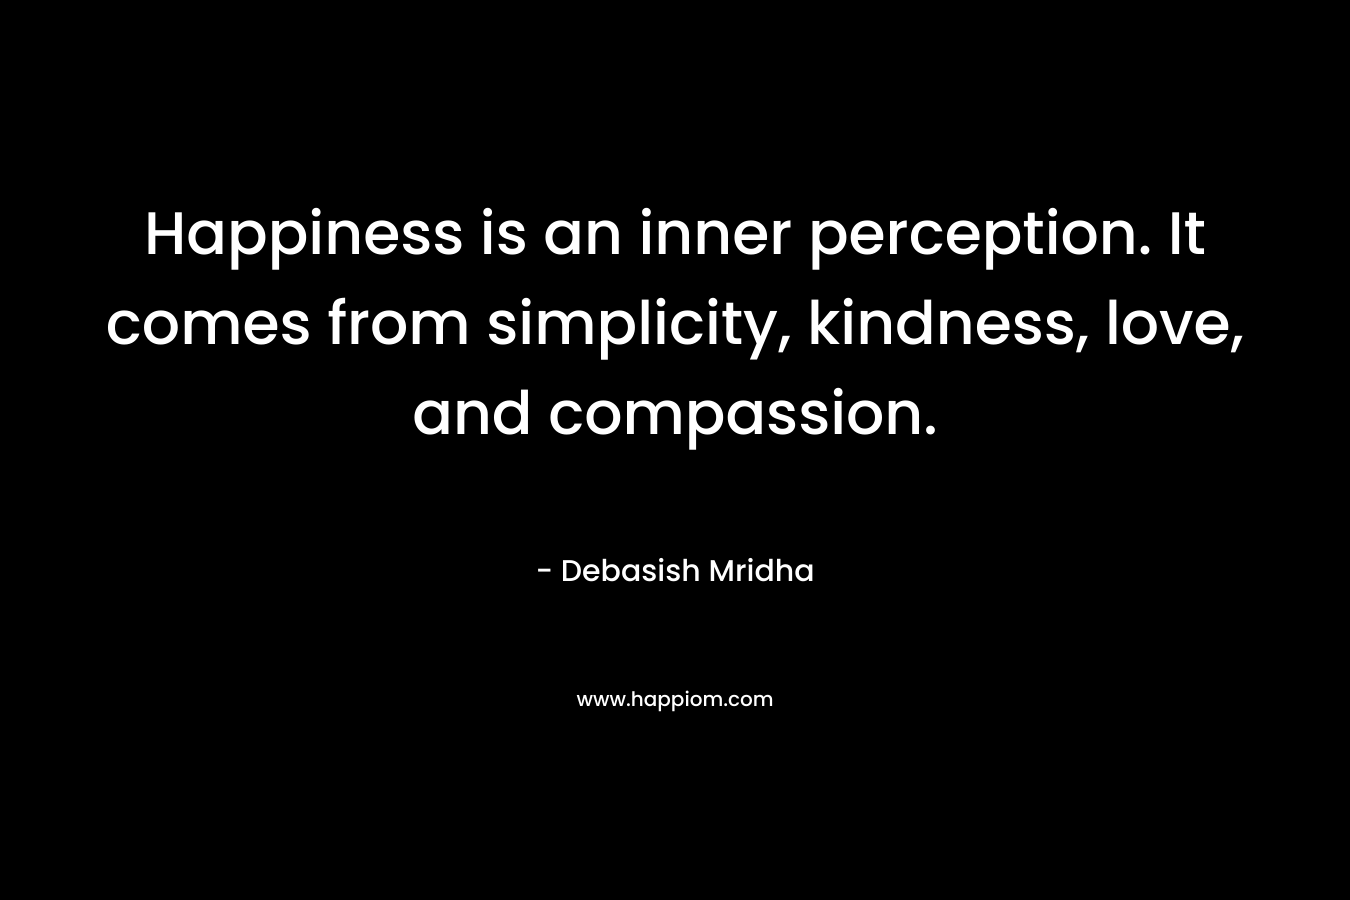 Happiness is an inner perception. It comes from simplicity, kindness, love, and compassion.